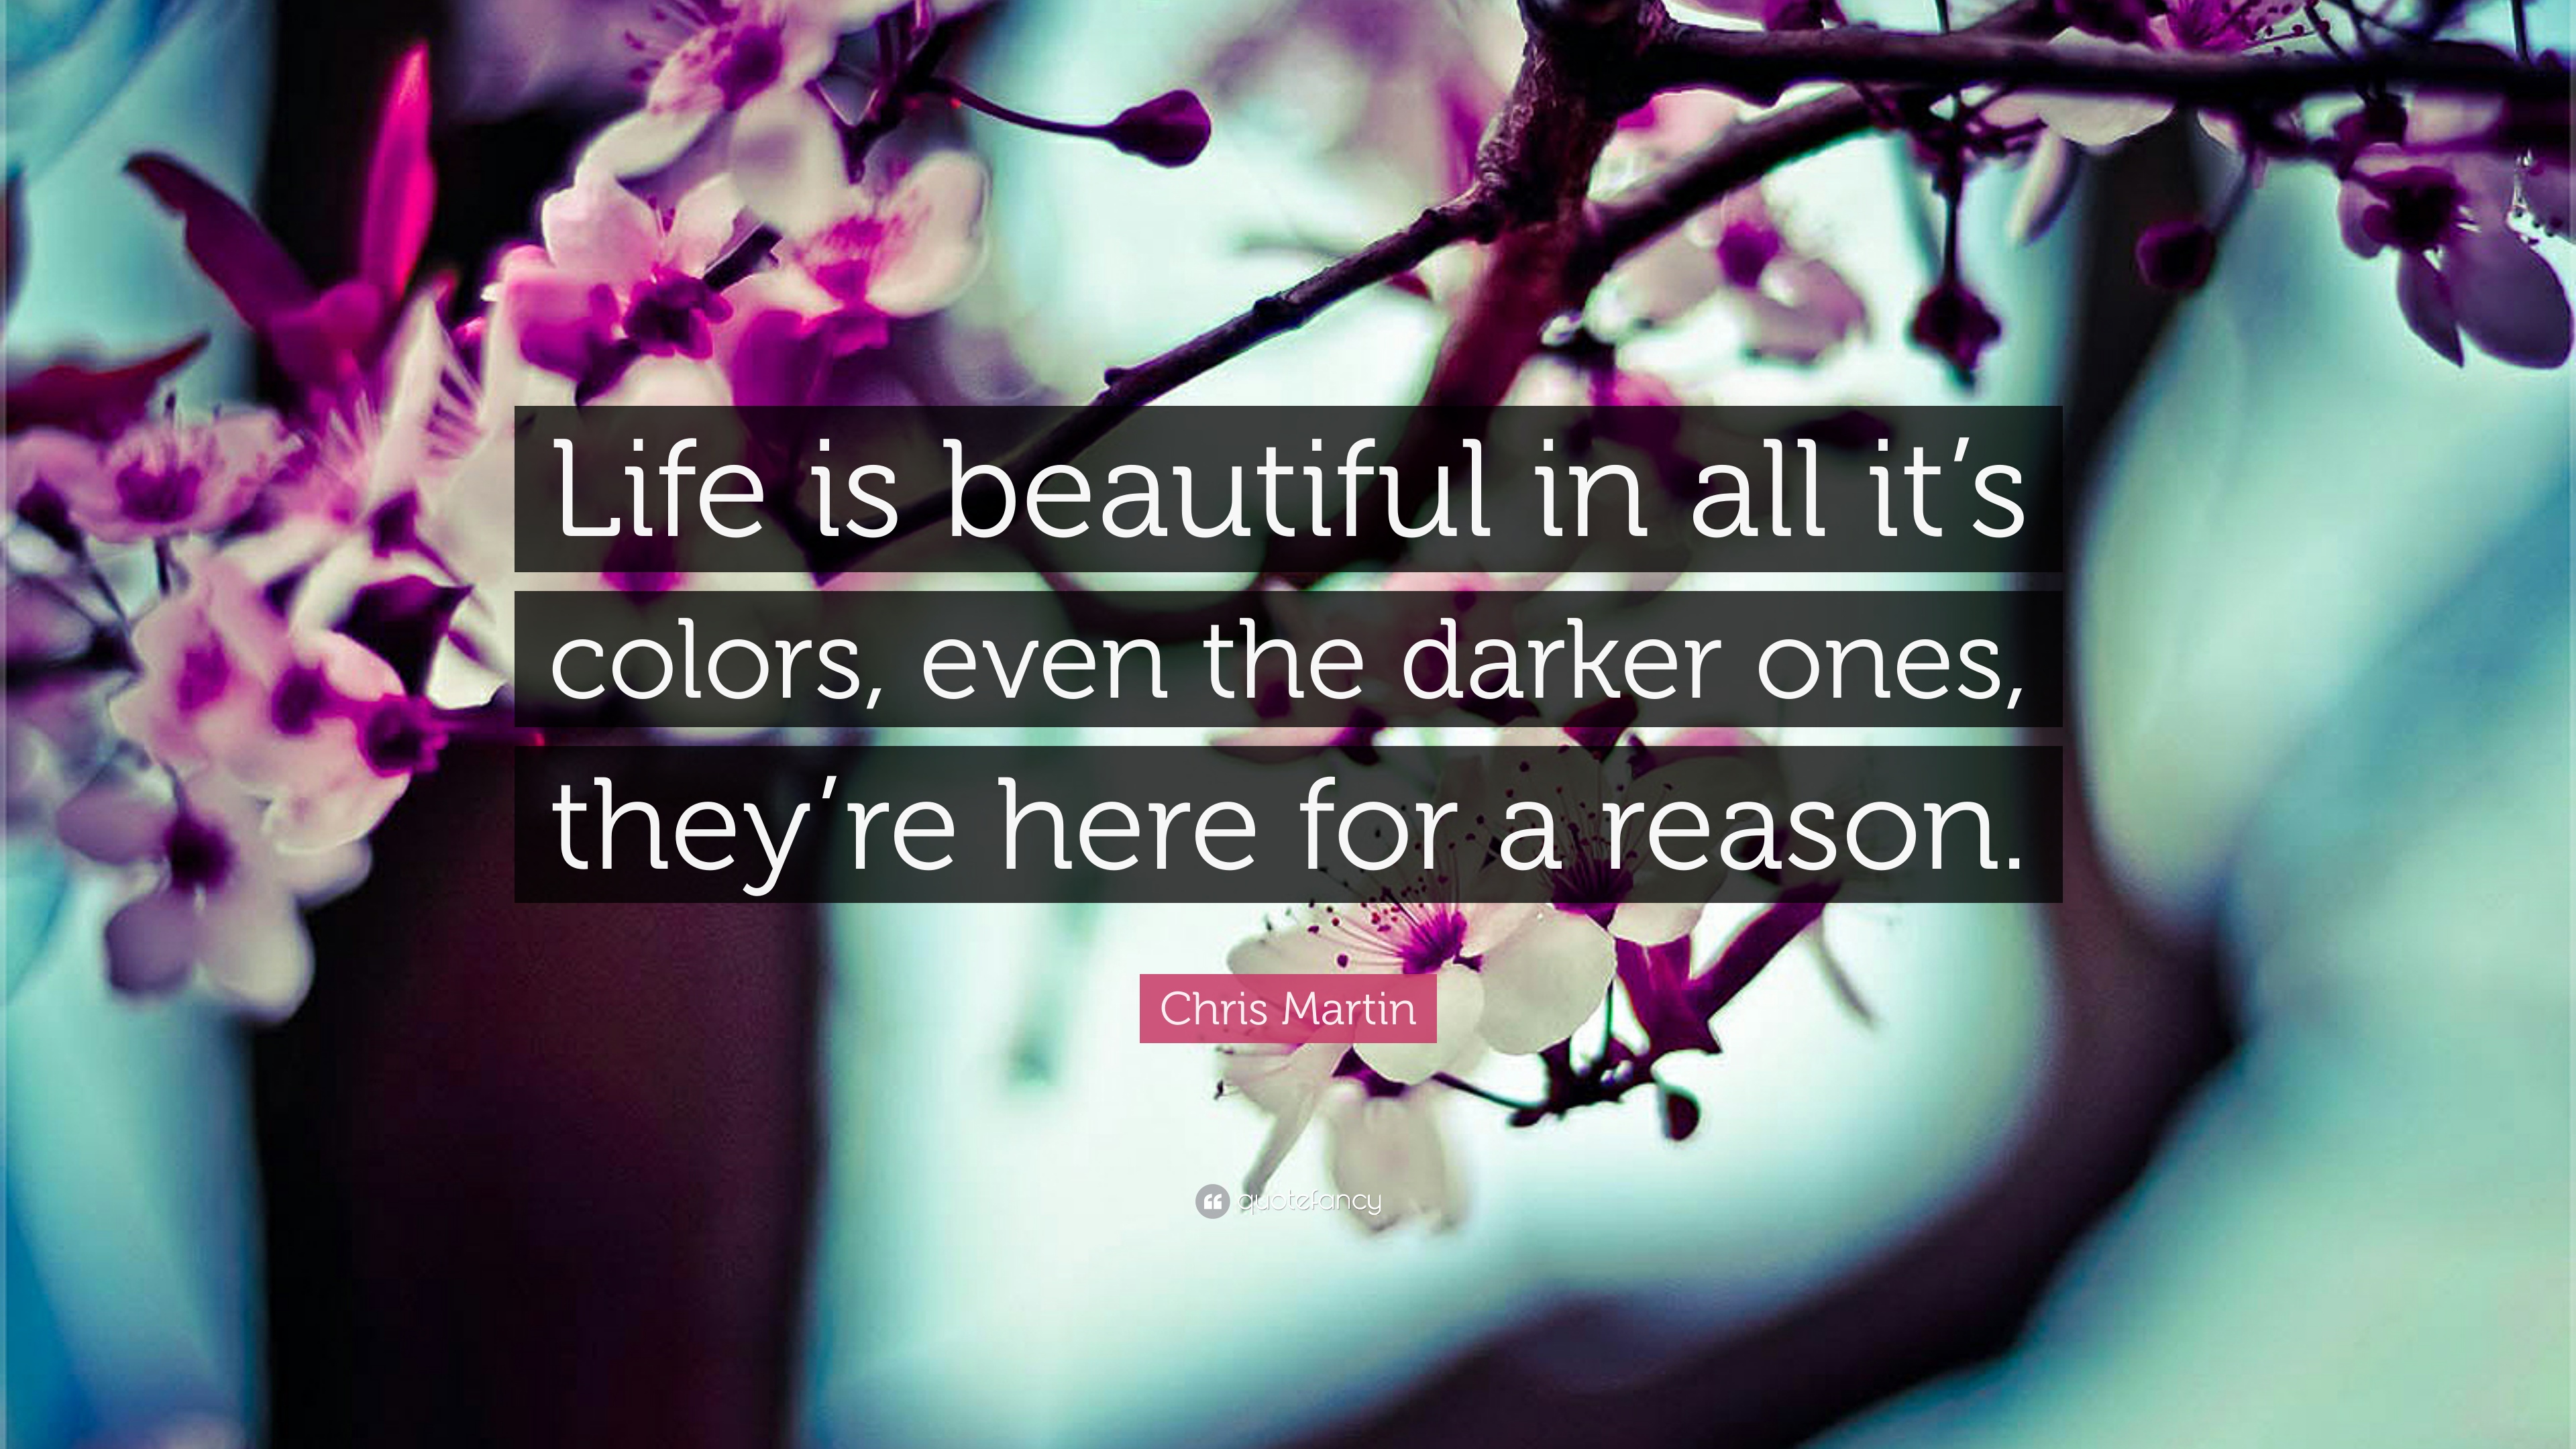 Chris Martin Quote: “Life is beautiful in all it's colors, even the ...